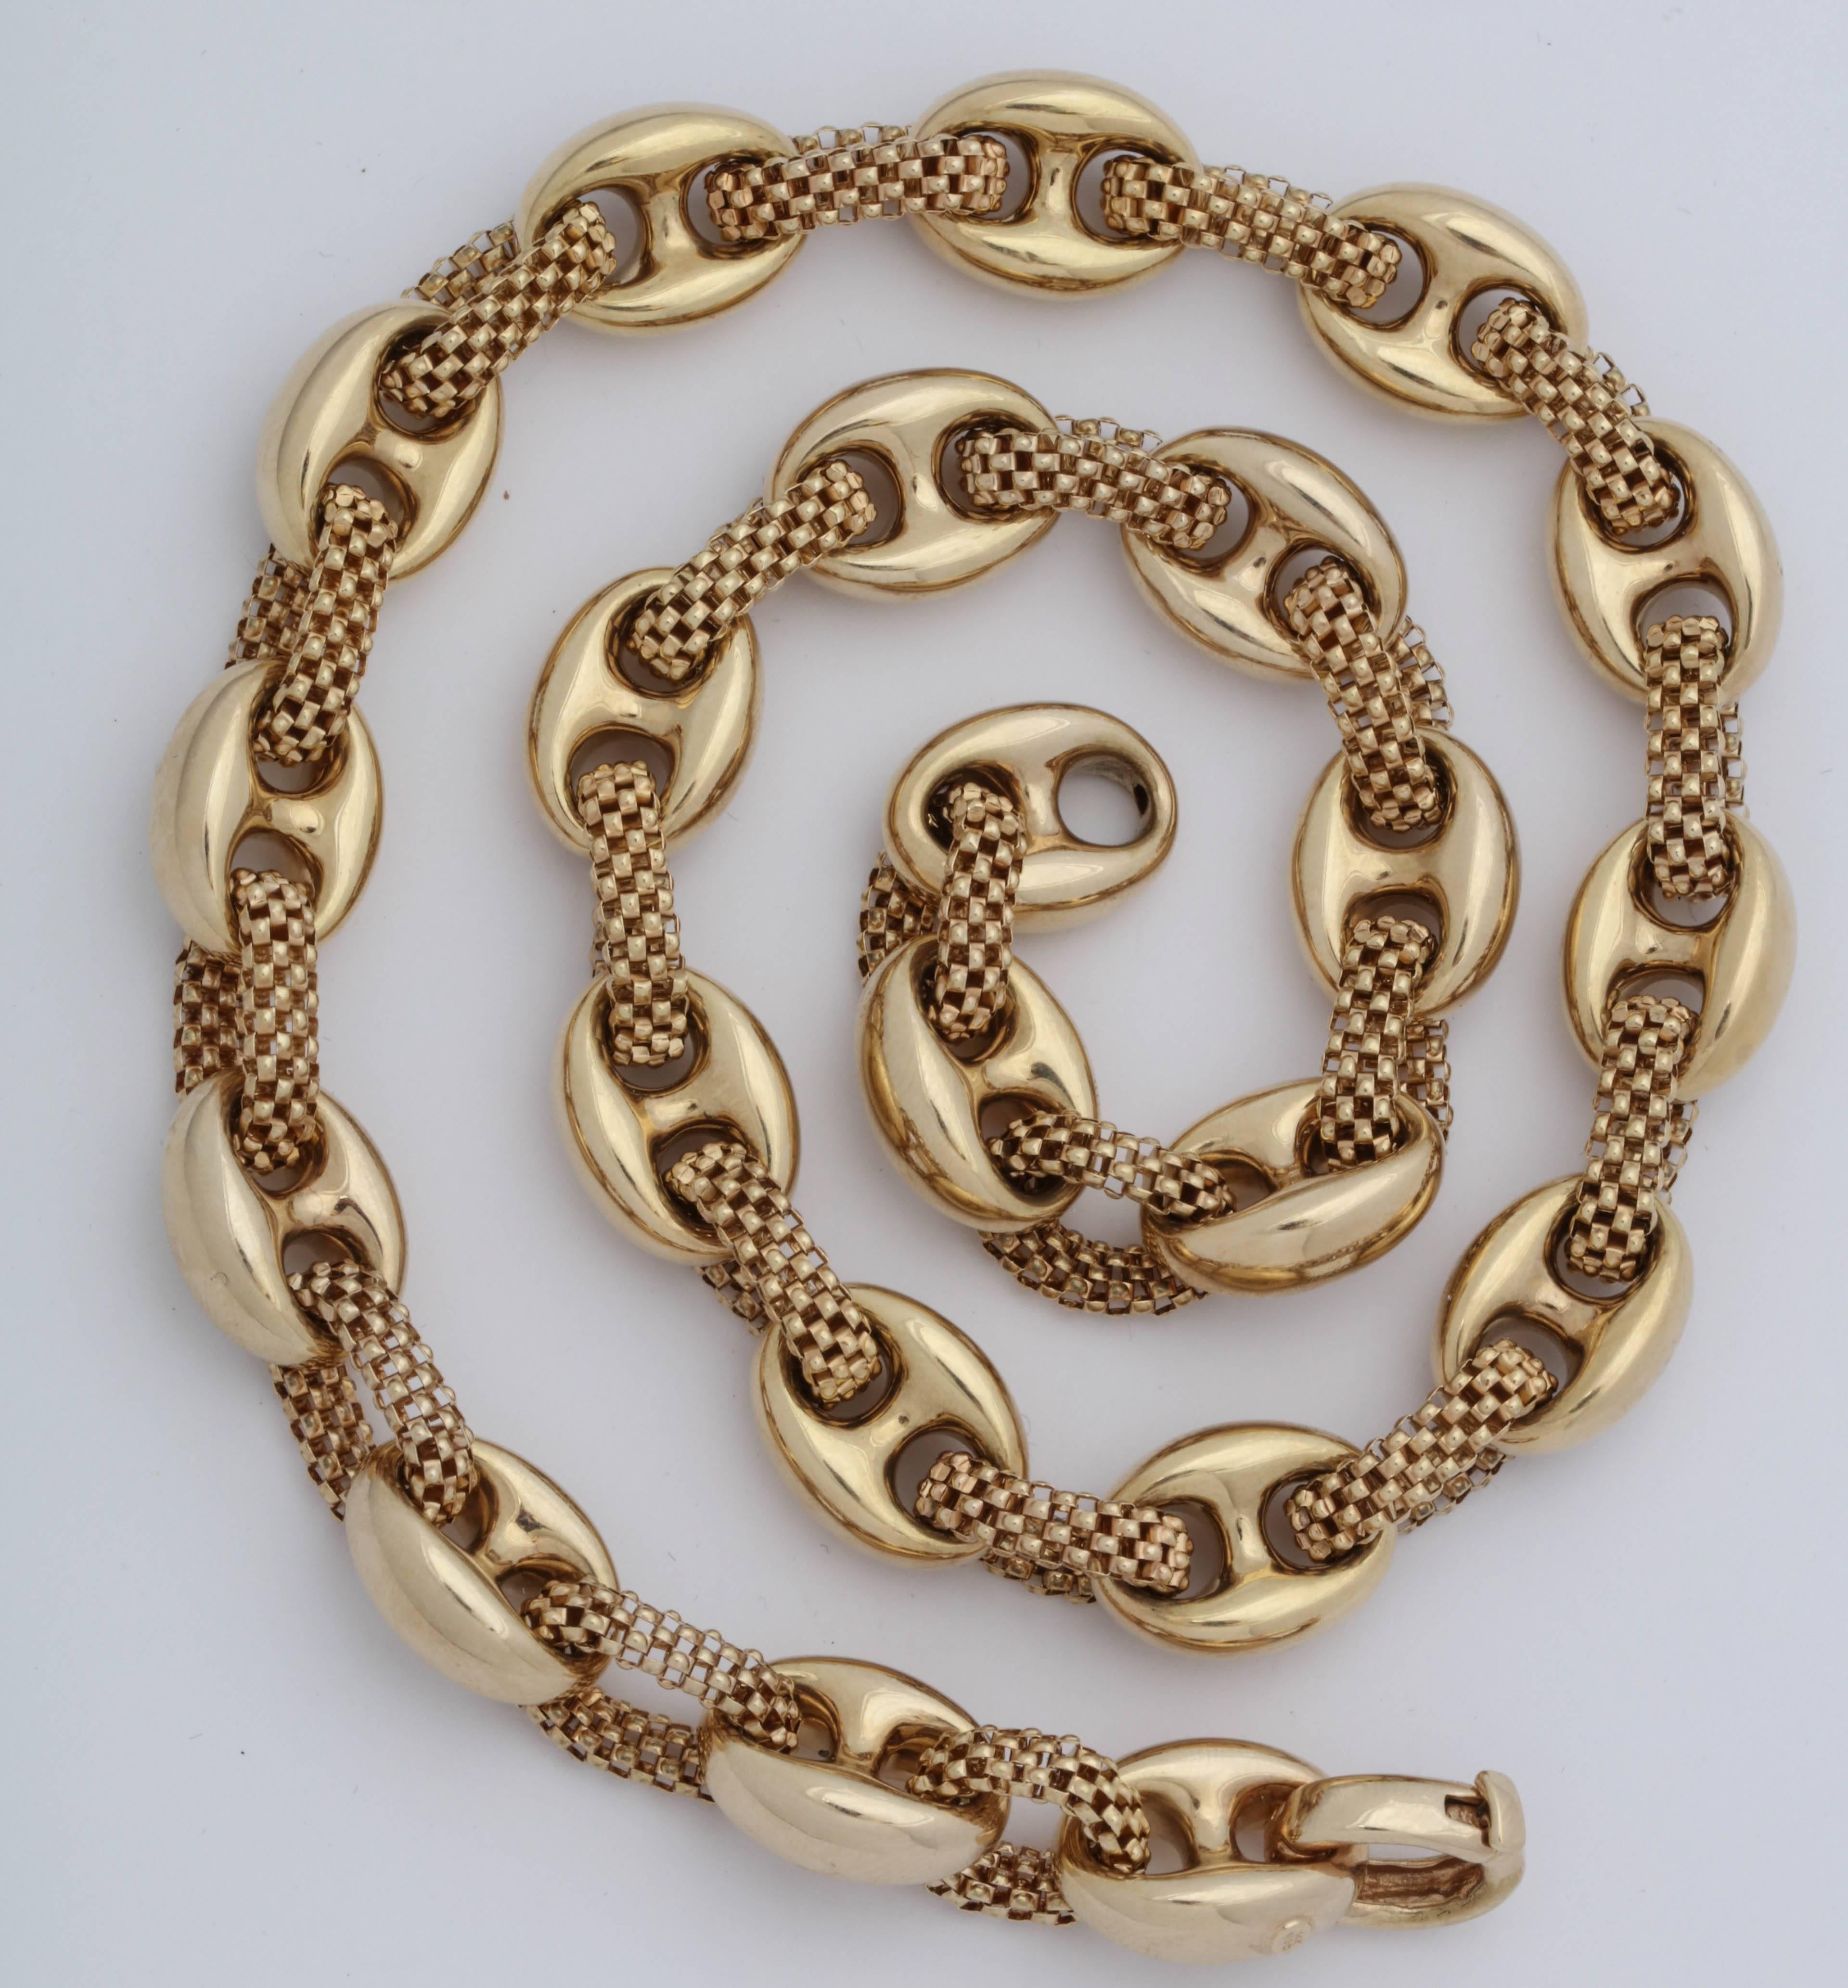 One Unisex 14kt Yellow Gold Intertwined Link Chain Necklace Composed Of Two different Textures Of Gold : One Link Is In The Shape Of A High Polish Anchor Style Link And The Other Link Is Made Of a Three Dimensional Box Link Creating A Unique Ultra